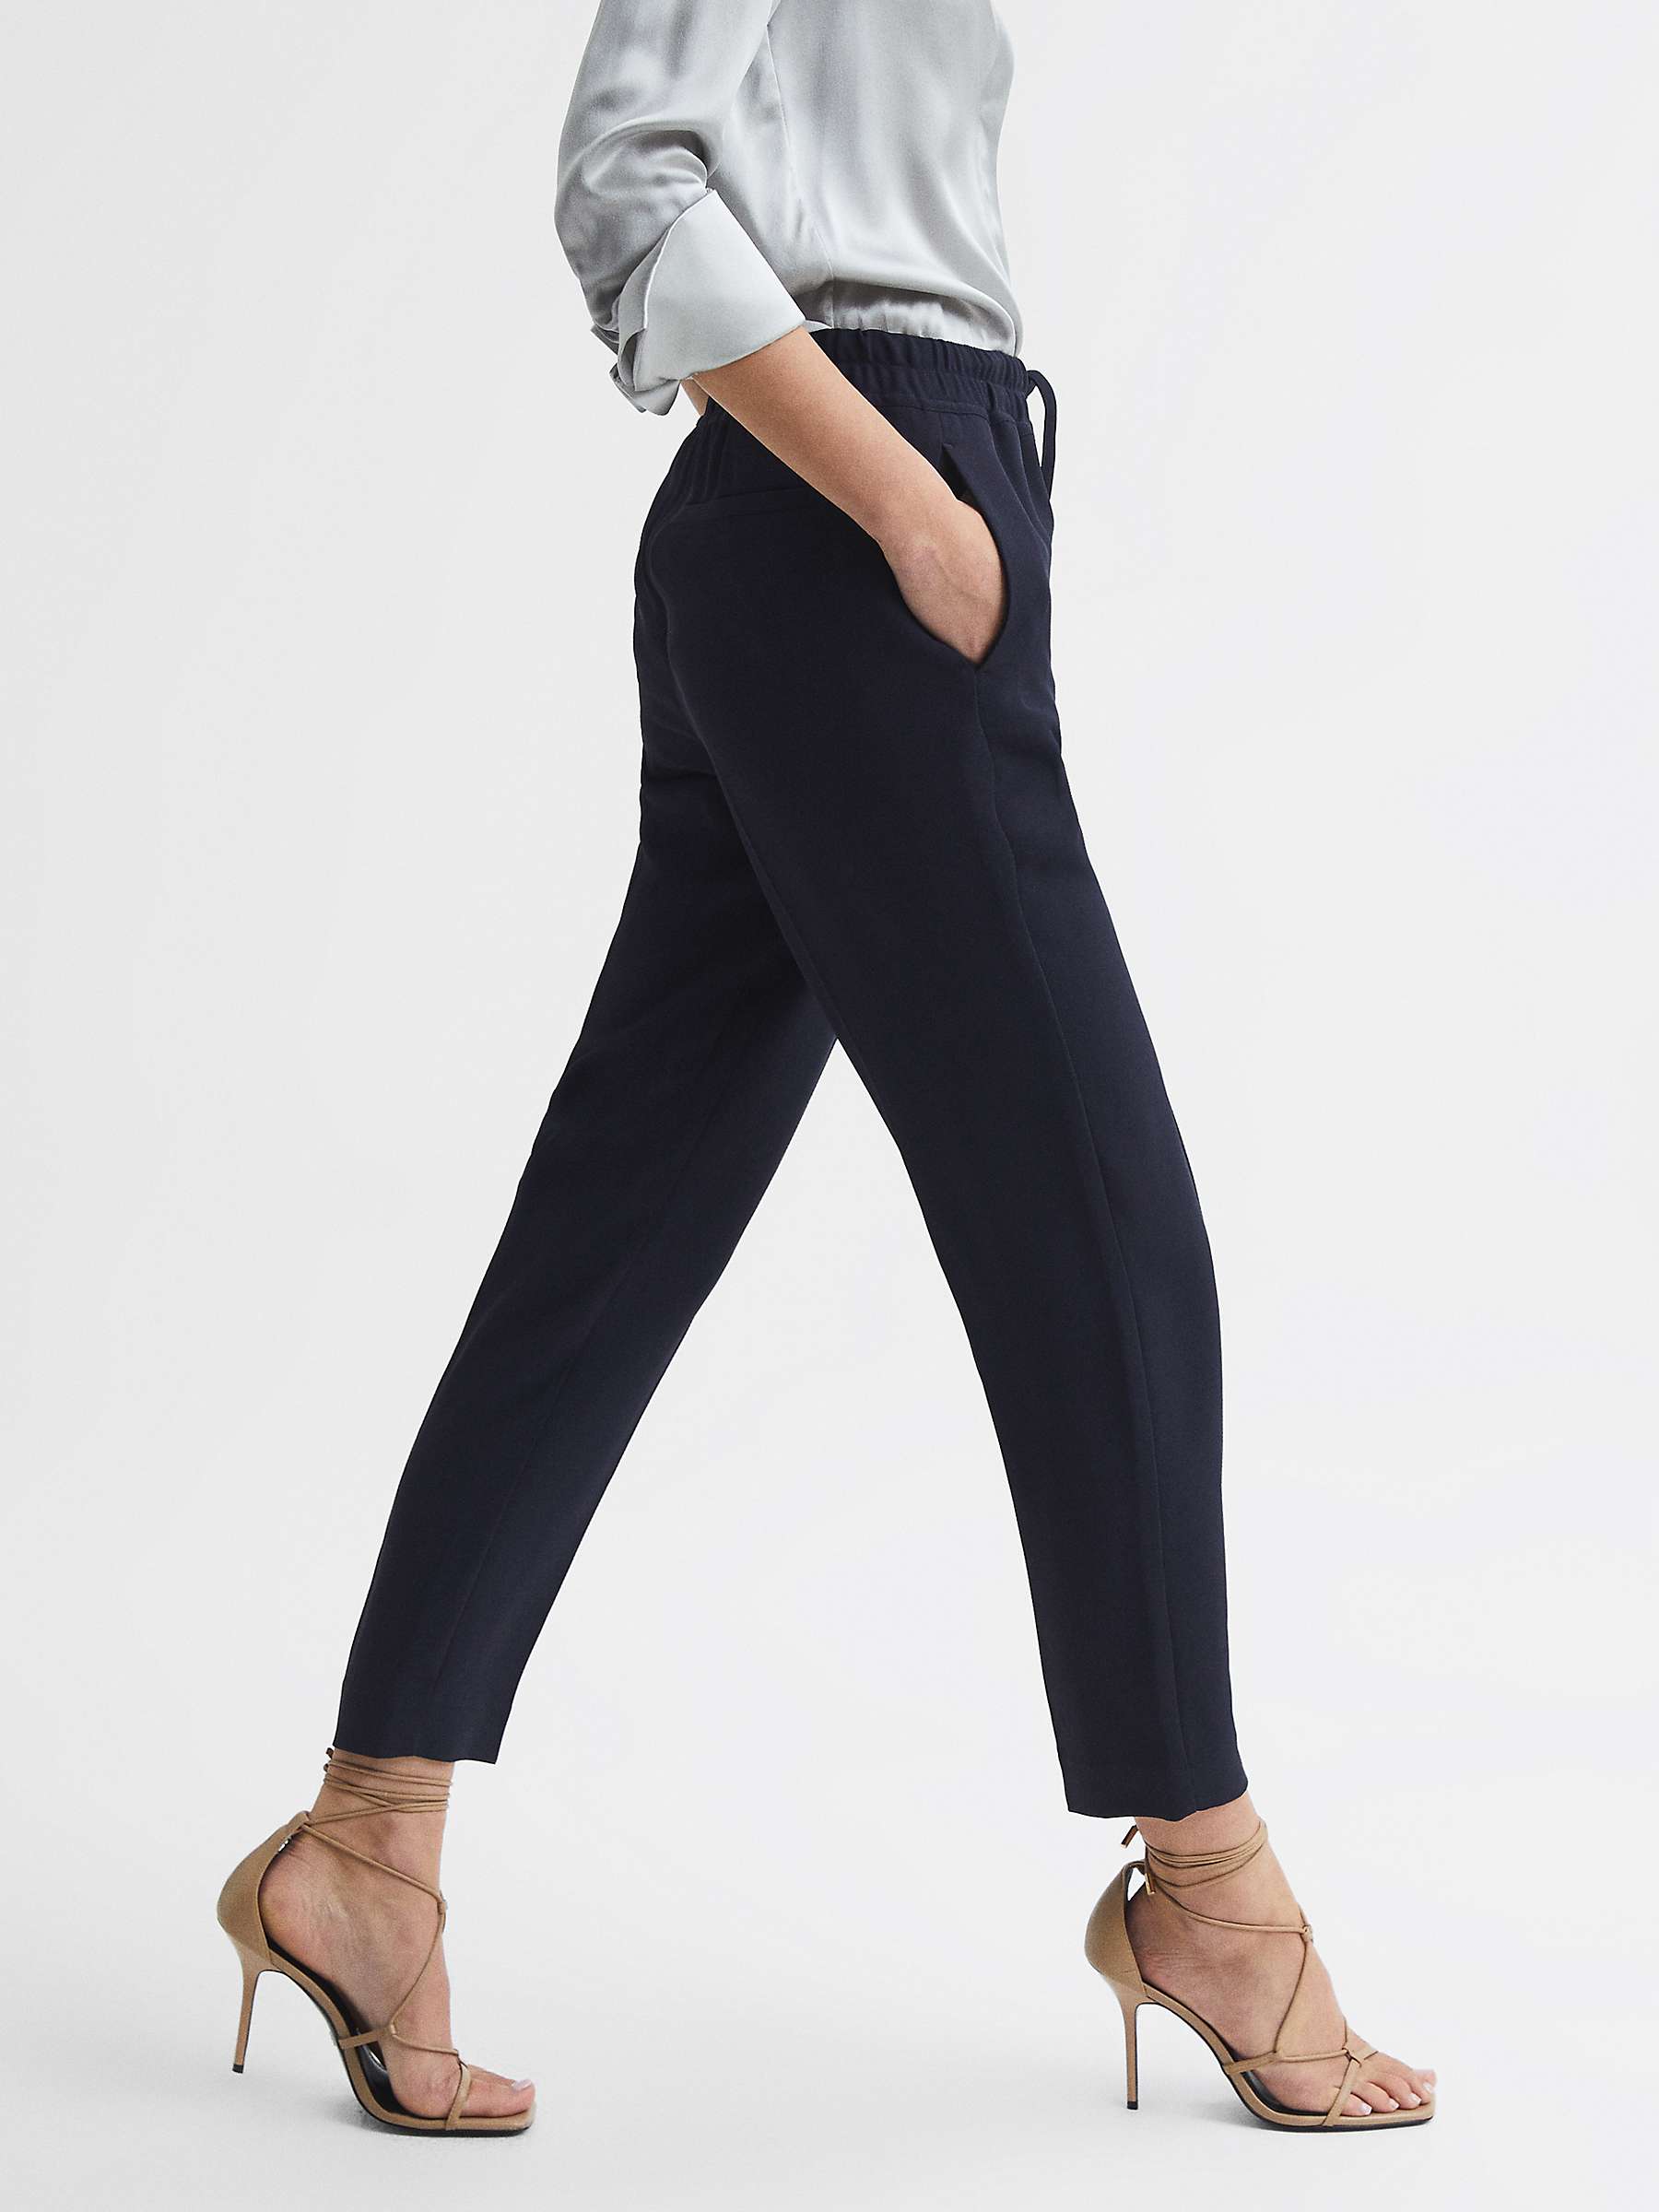 Buy Reiss Hailey Ankle Grazer Trousers, Navy Online at johnlewis.com